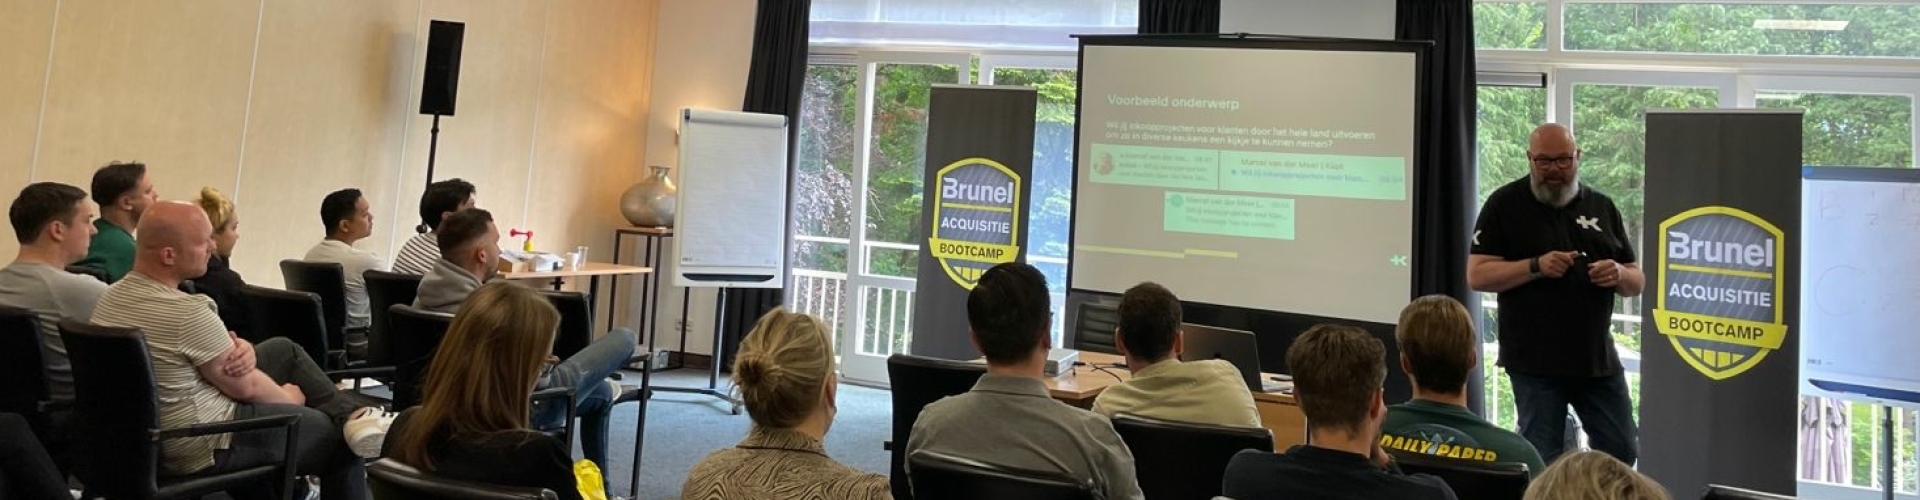 review-sourcing-training-brunel